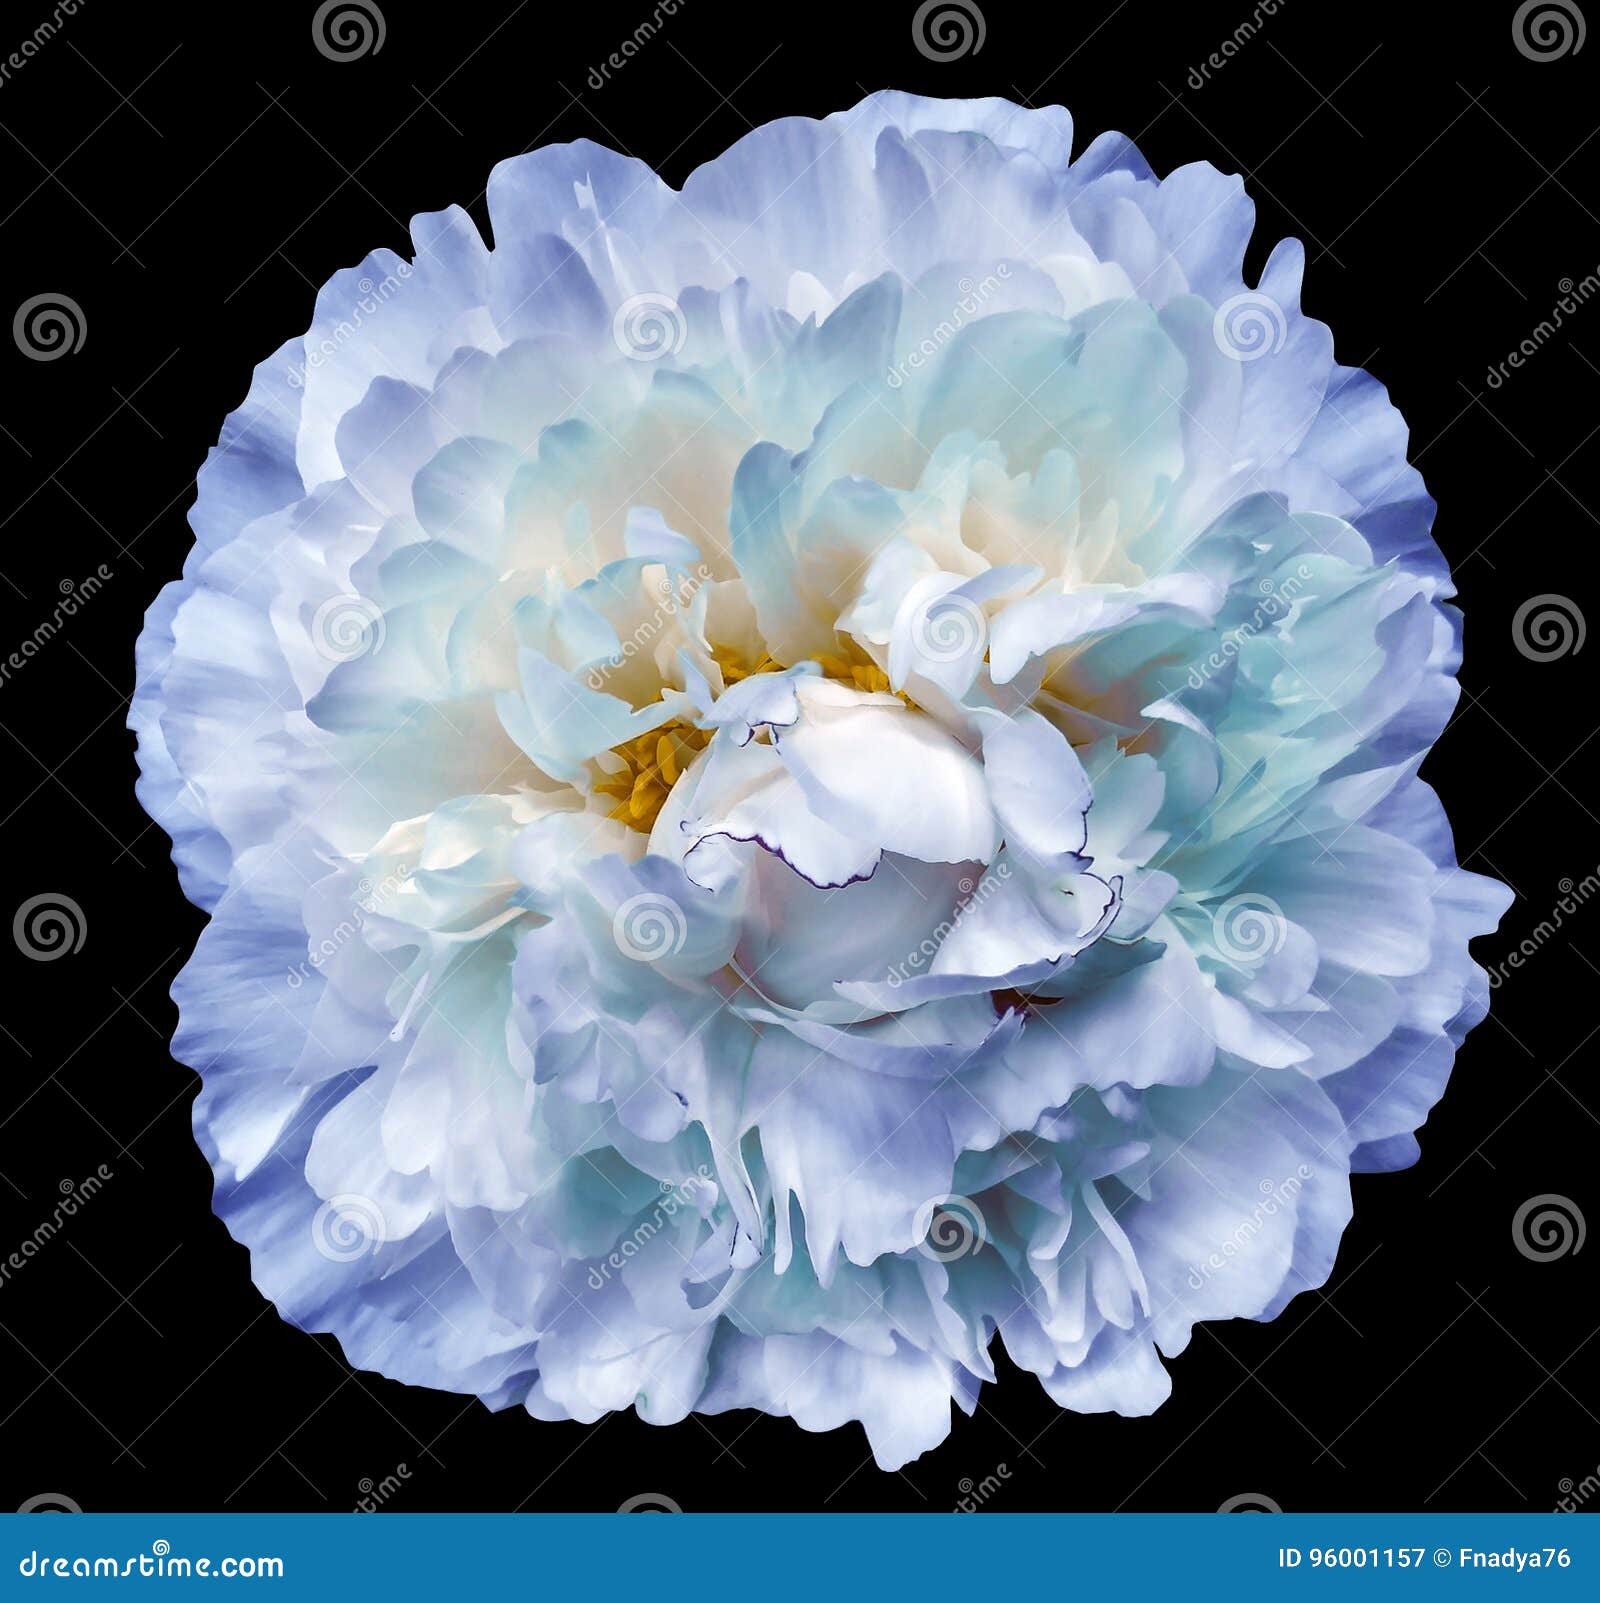 Peony Flower Blue White Turquoise On The Black Isolated Background With Clipping Path Nature Closeup No Shadows Stock Image Image Of Flora Clipping 96001157